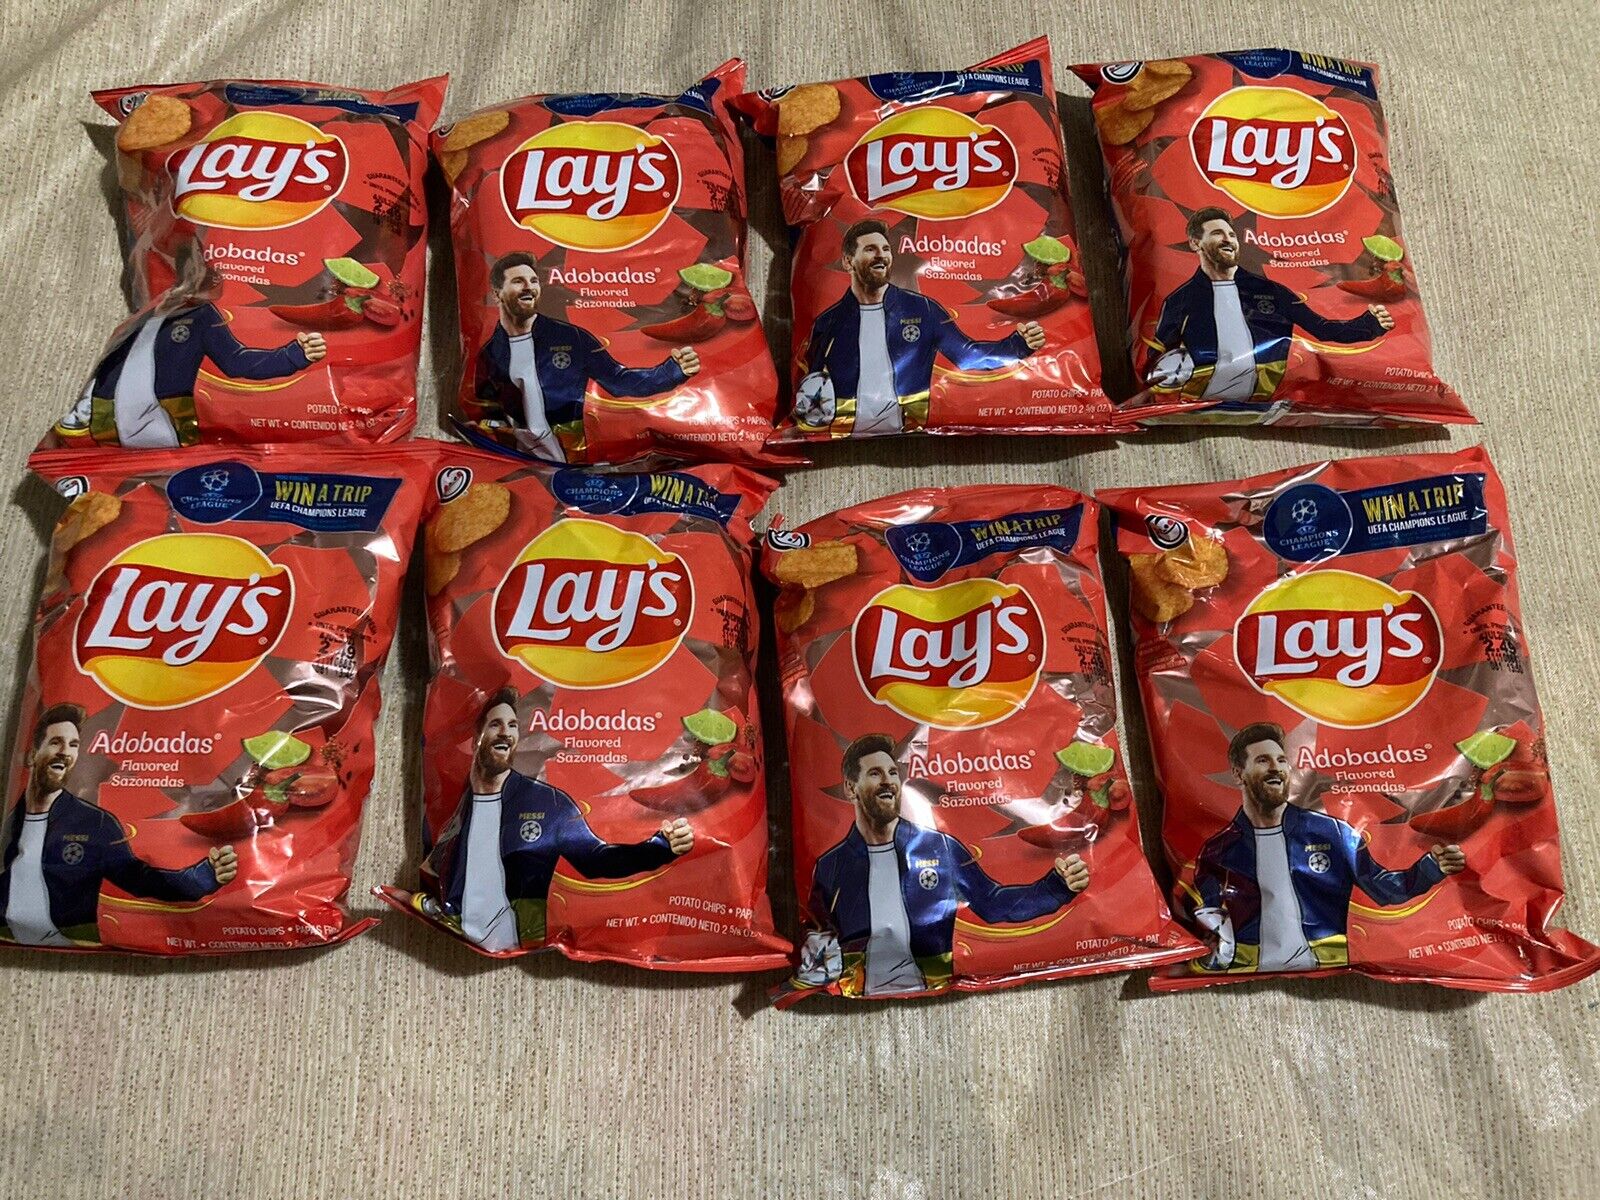 Lionel Messi Lays Potato Chips • Lot Of 8 Bags • Limited Edition Rare